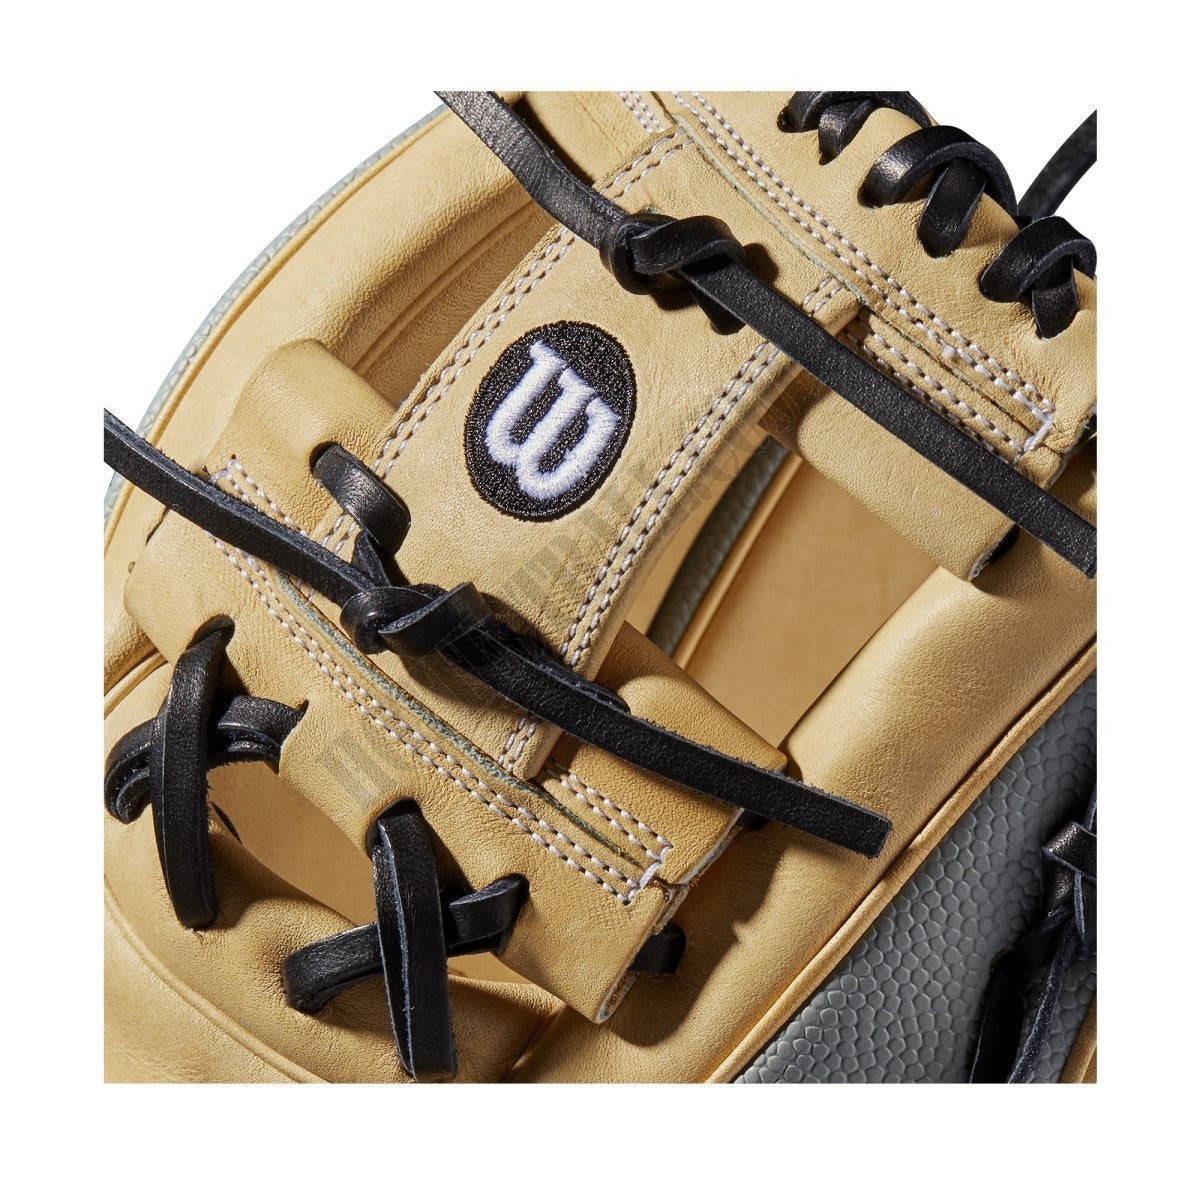 2019 A2000 1788 SuperSkin 11.25" Infield Baseball Glove - Right Hand Throw ● Wilson Promotions - -5